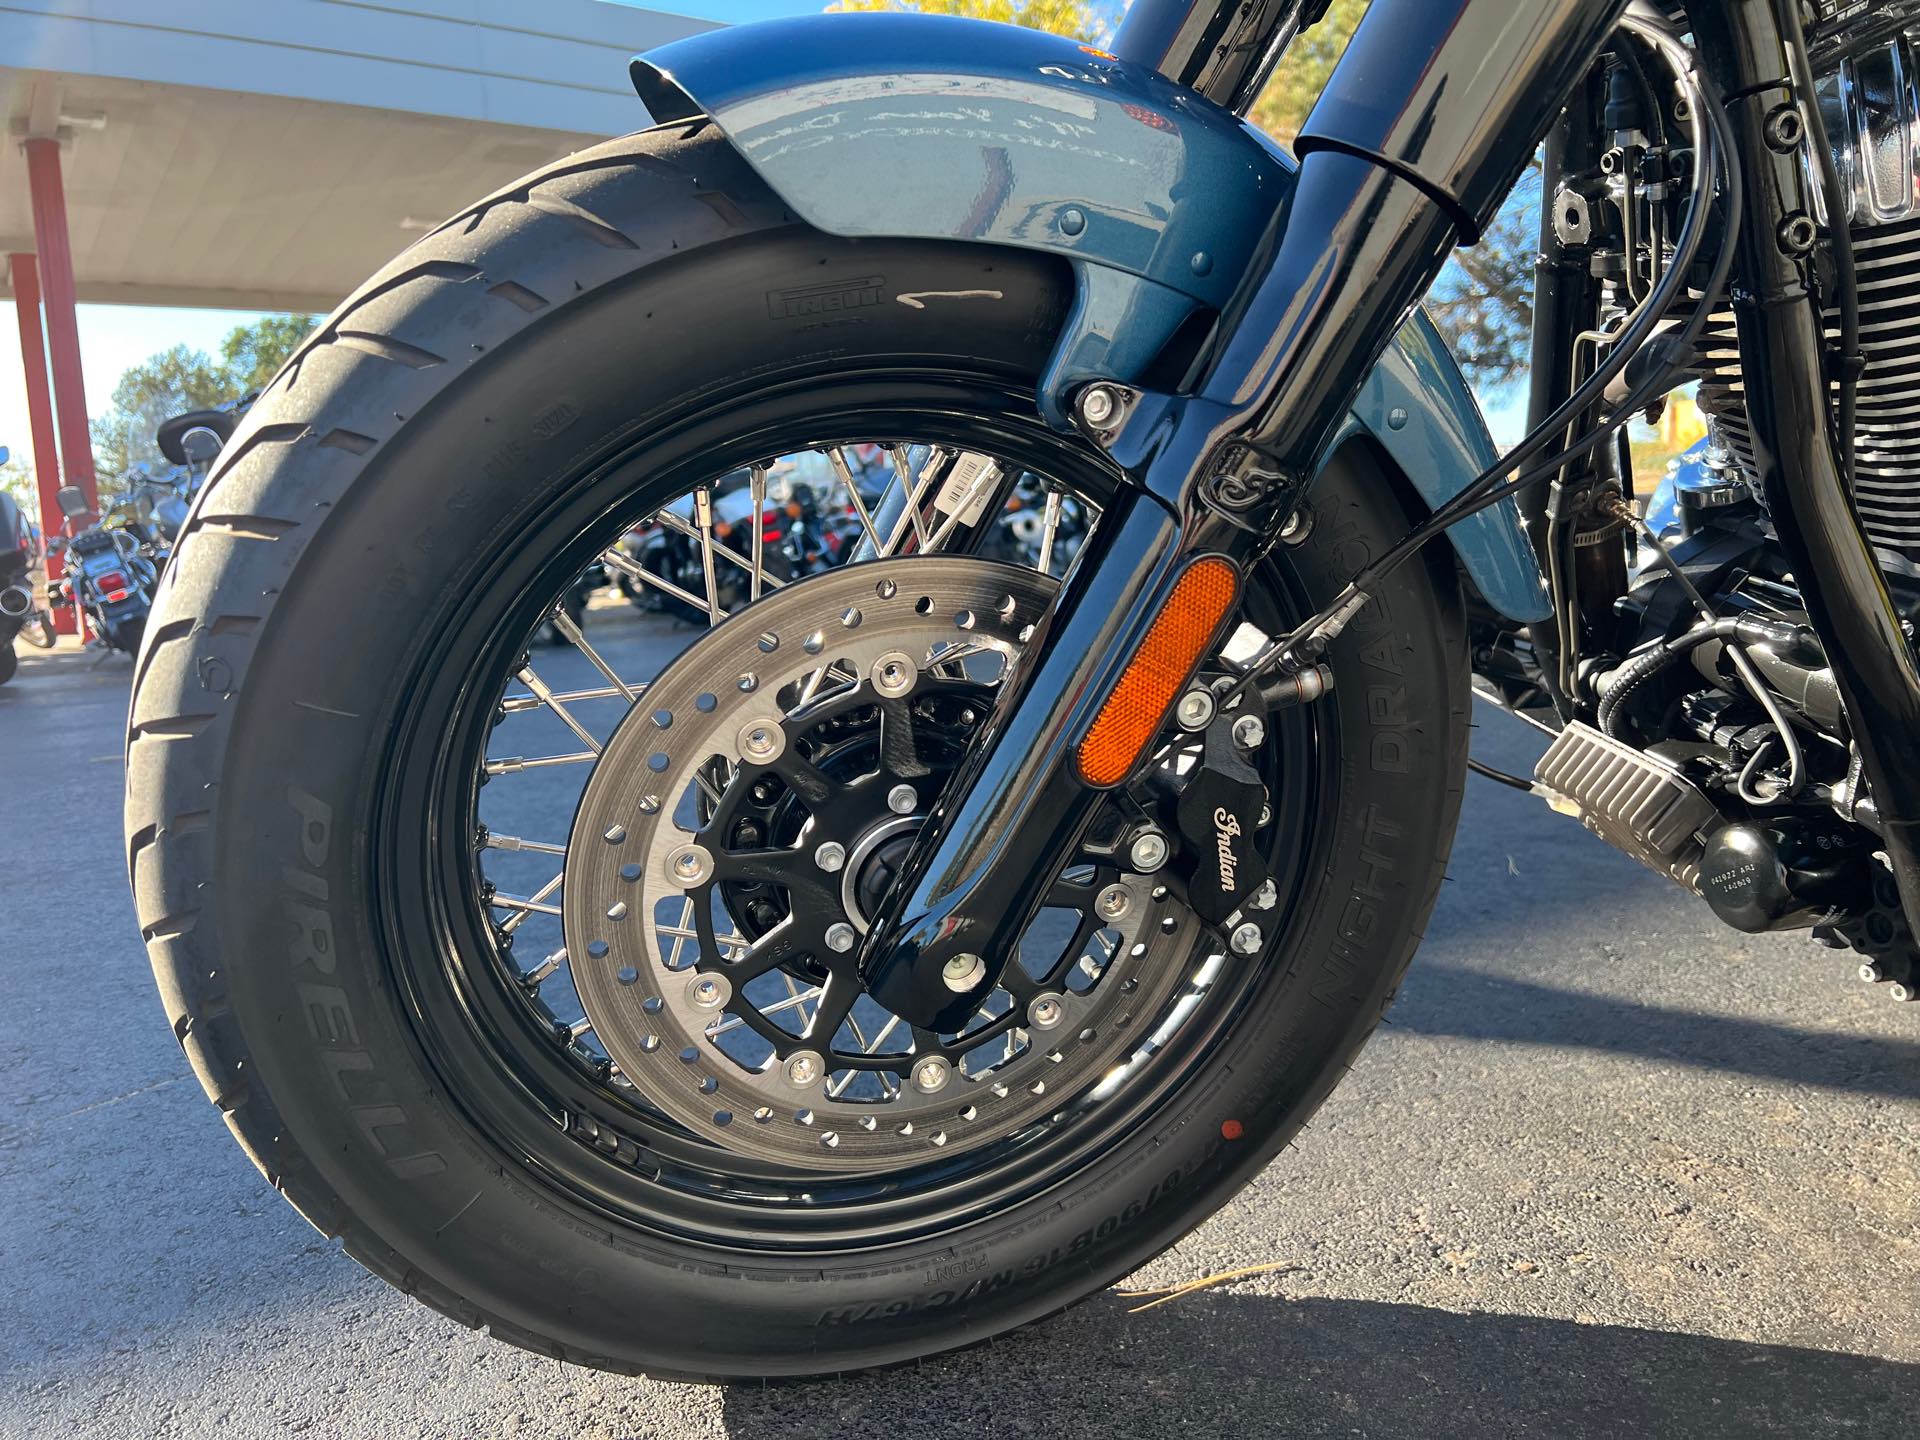 2022 Indian Motorcycle Super Chief Limited at Aces Motorcycles - Fort Collins